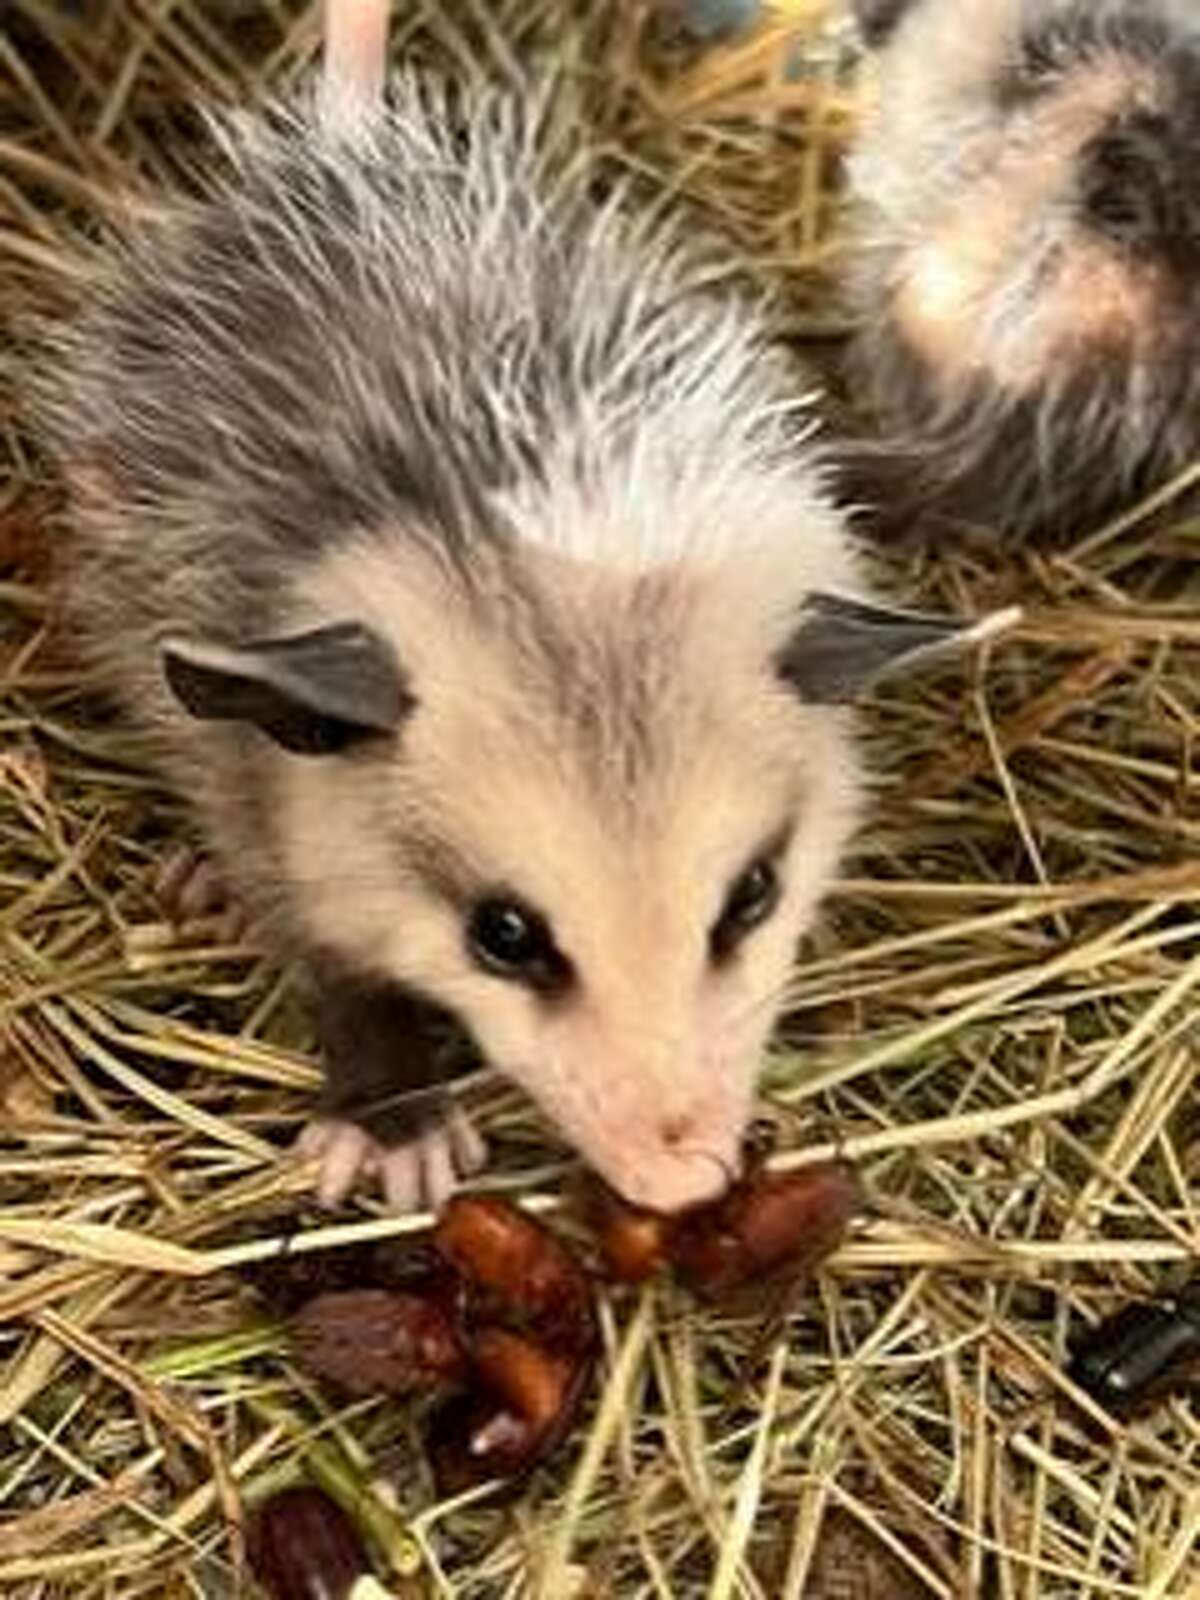 Possums are omnivores and eat anything including grains, insects (cockroaches), snails, ticks, frogs, rodents, birds, snakes, dead animals, etc. They are nature’s scavengers and help rid the garden of many pests that plague the garden.